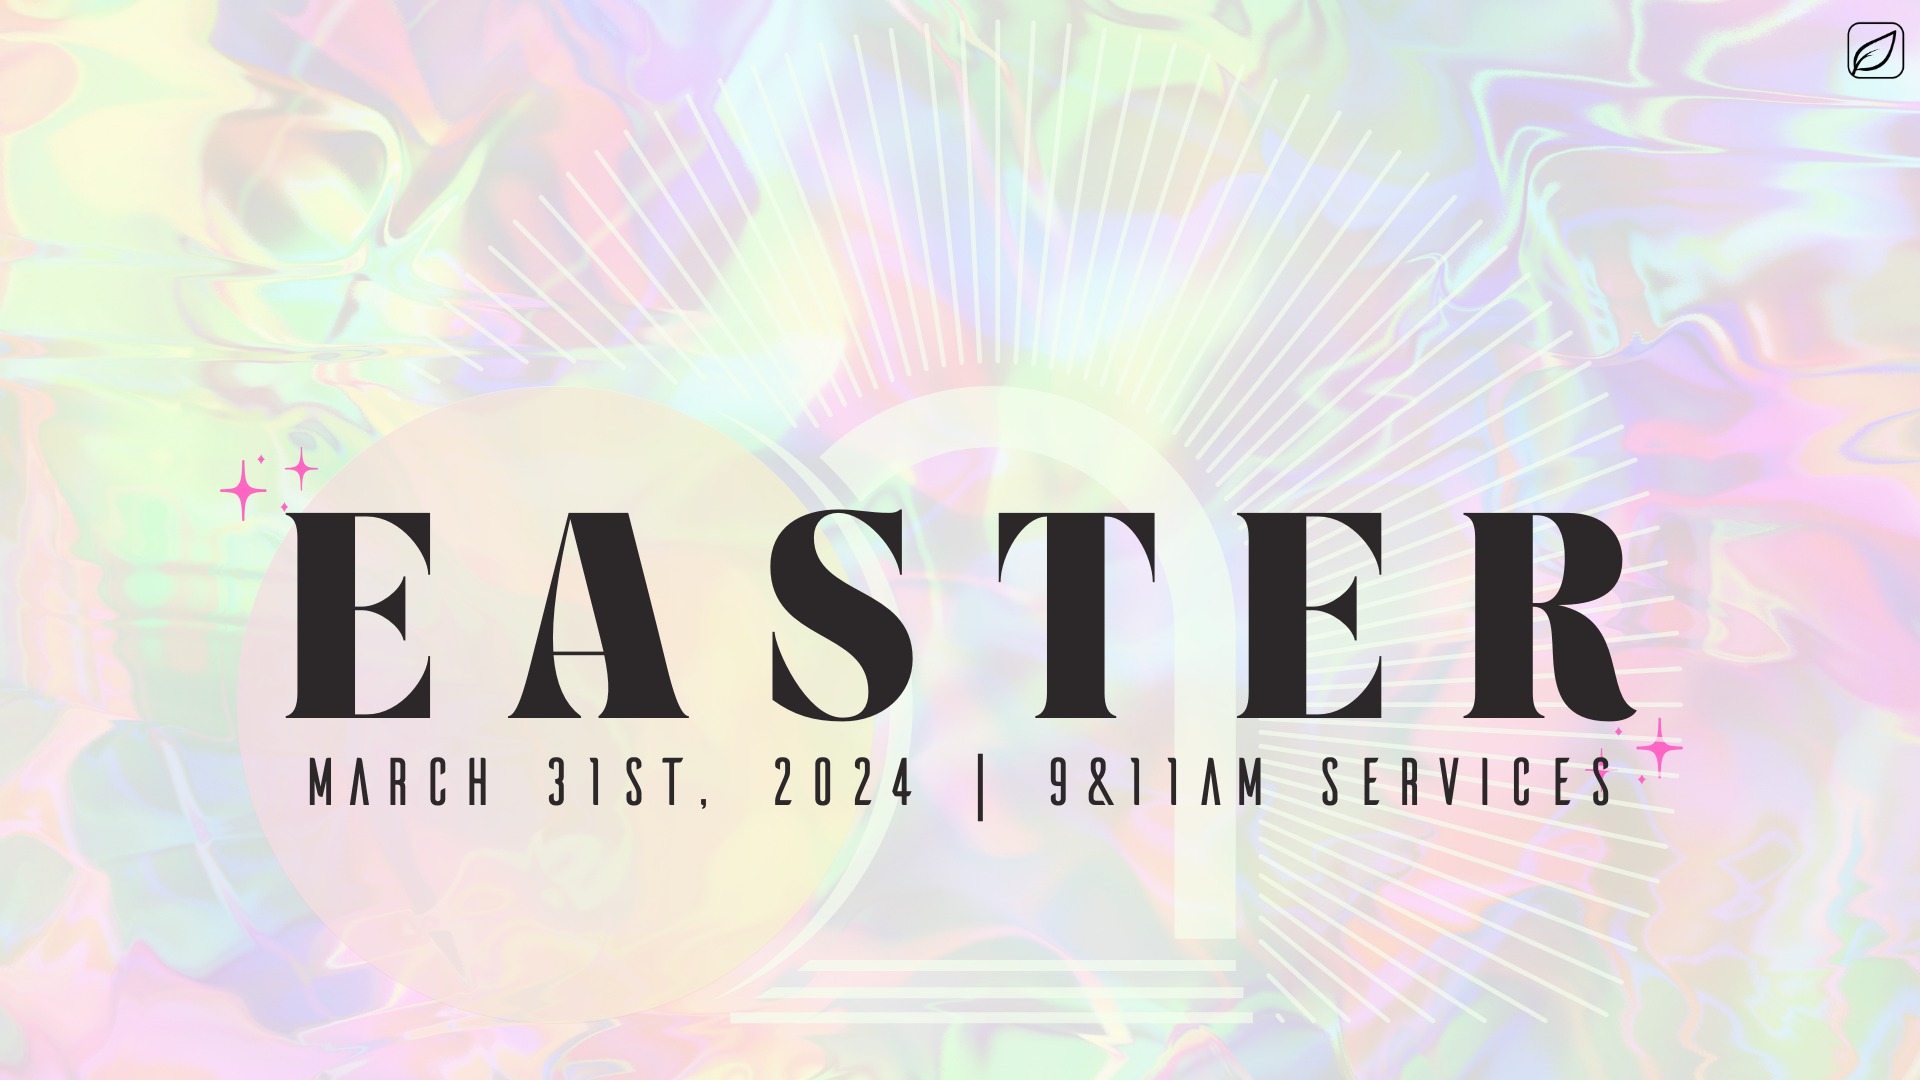 Event Promo Photo For Easter at New Life